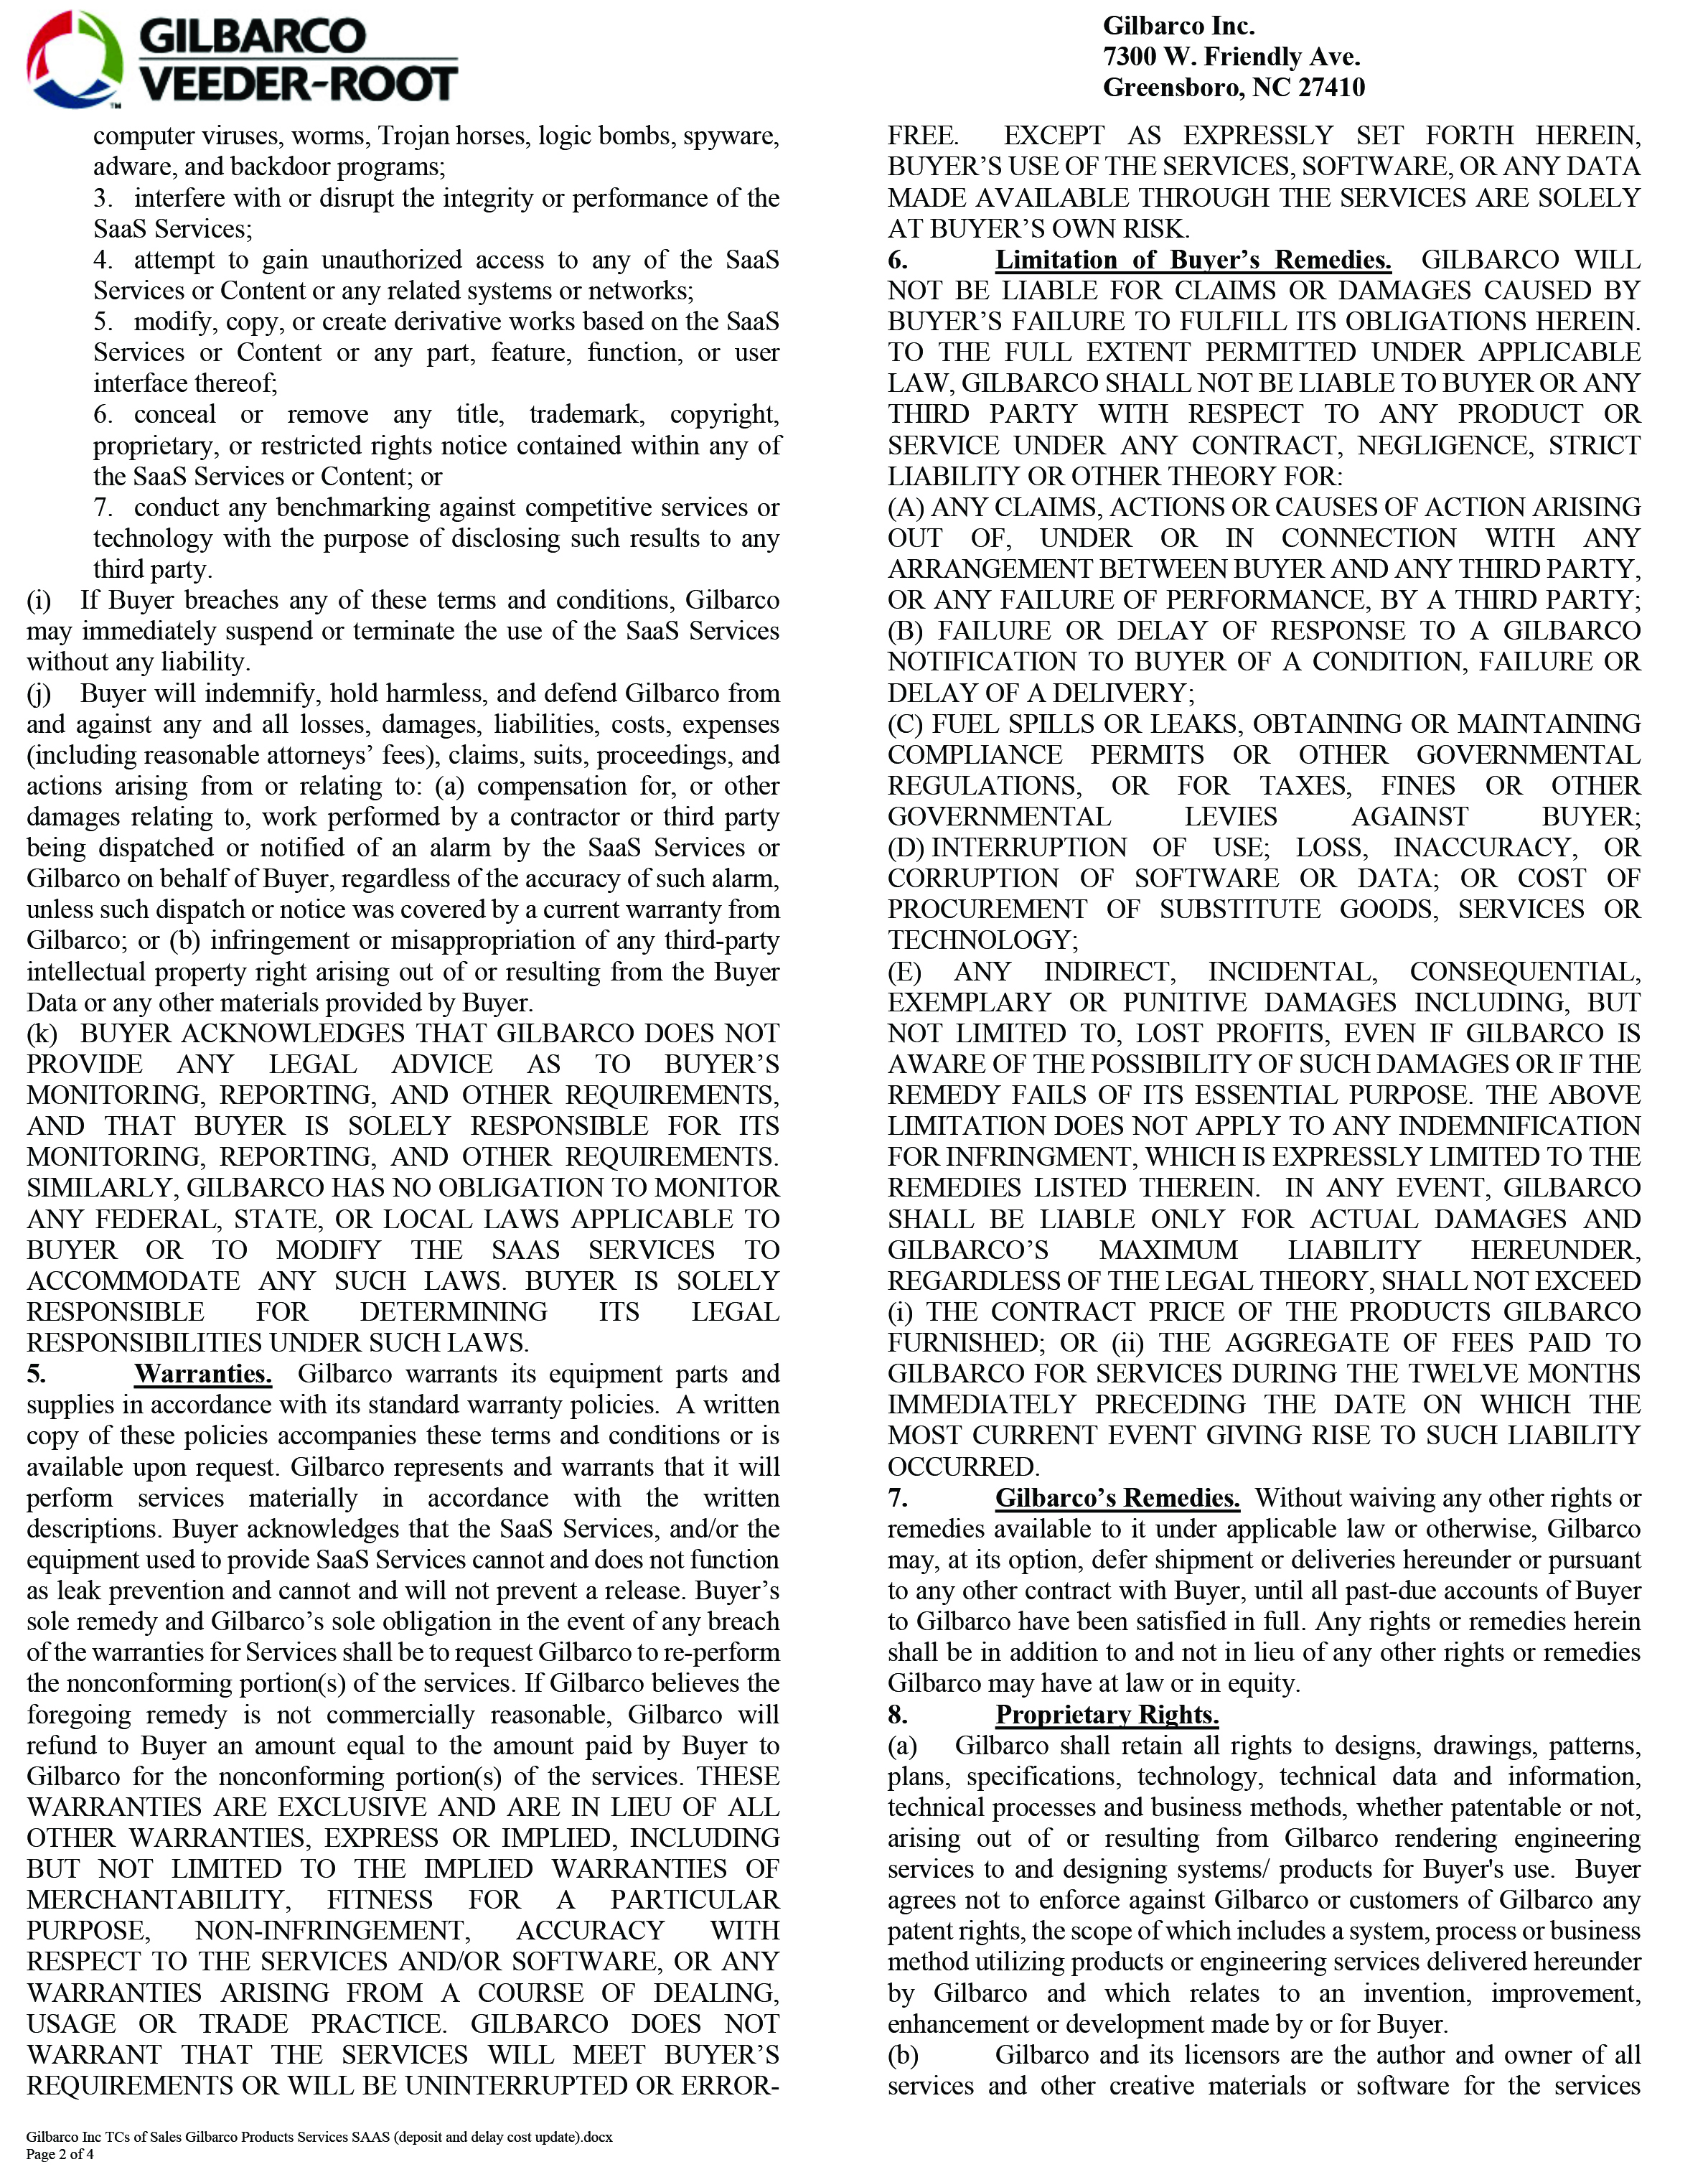 Gilbarco Terms and Conditions - Page 2